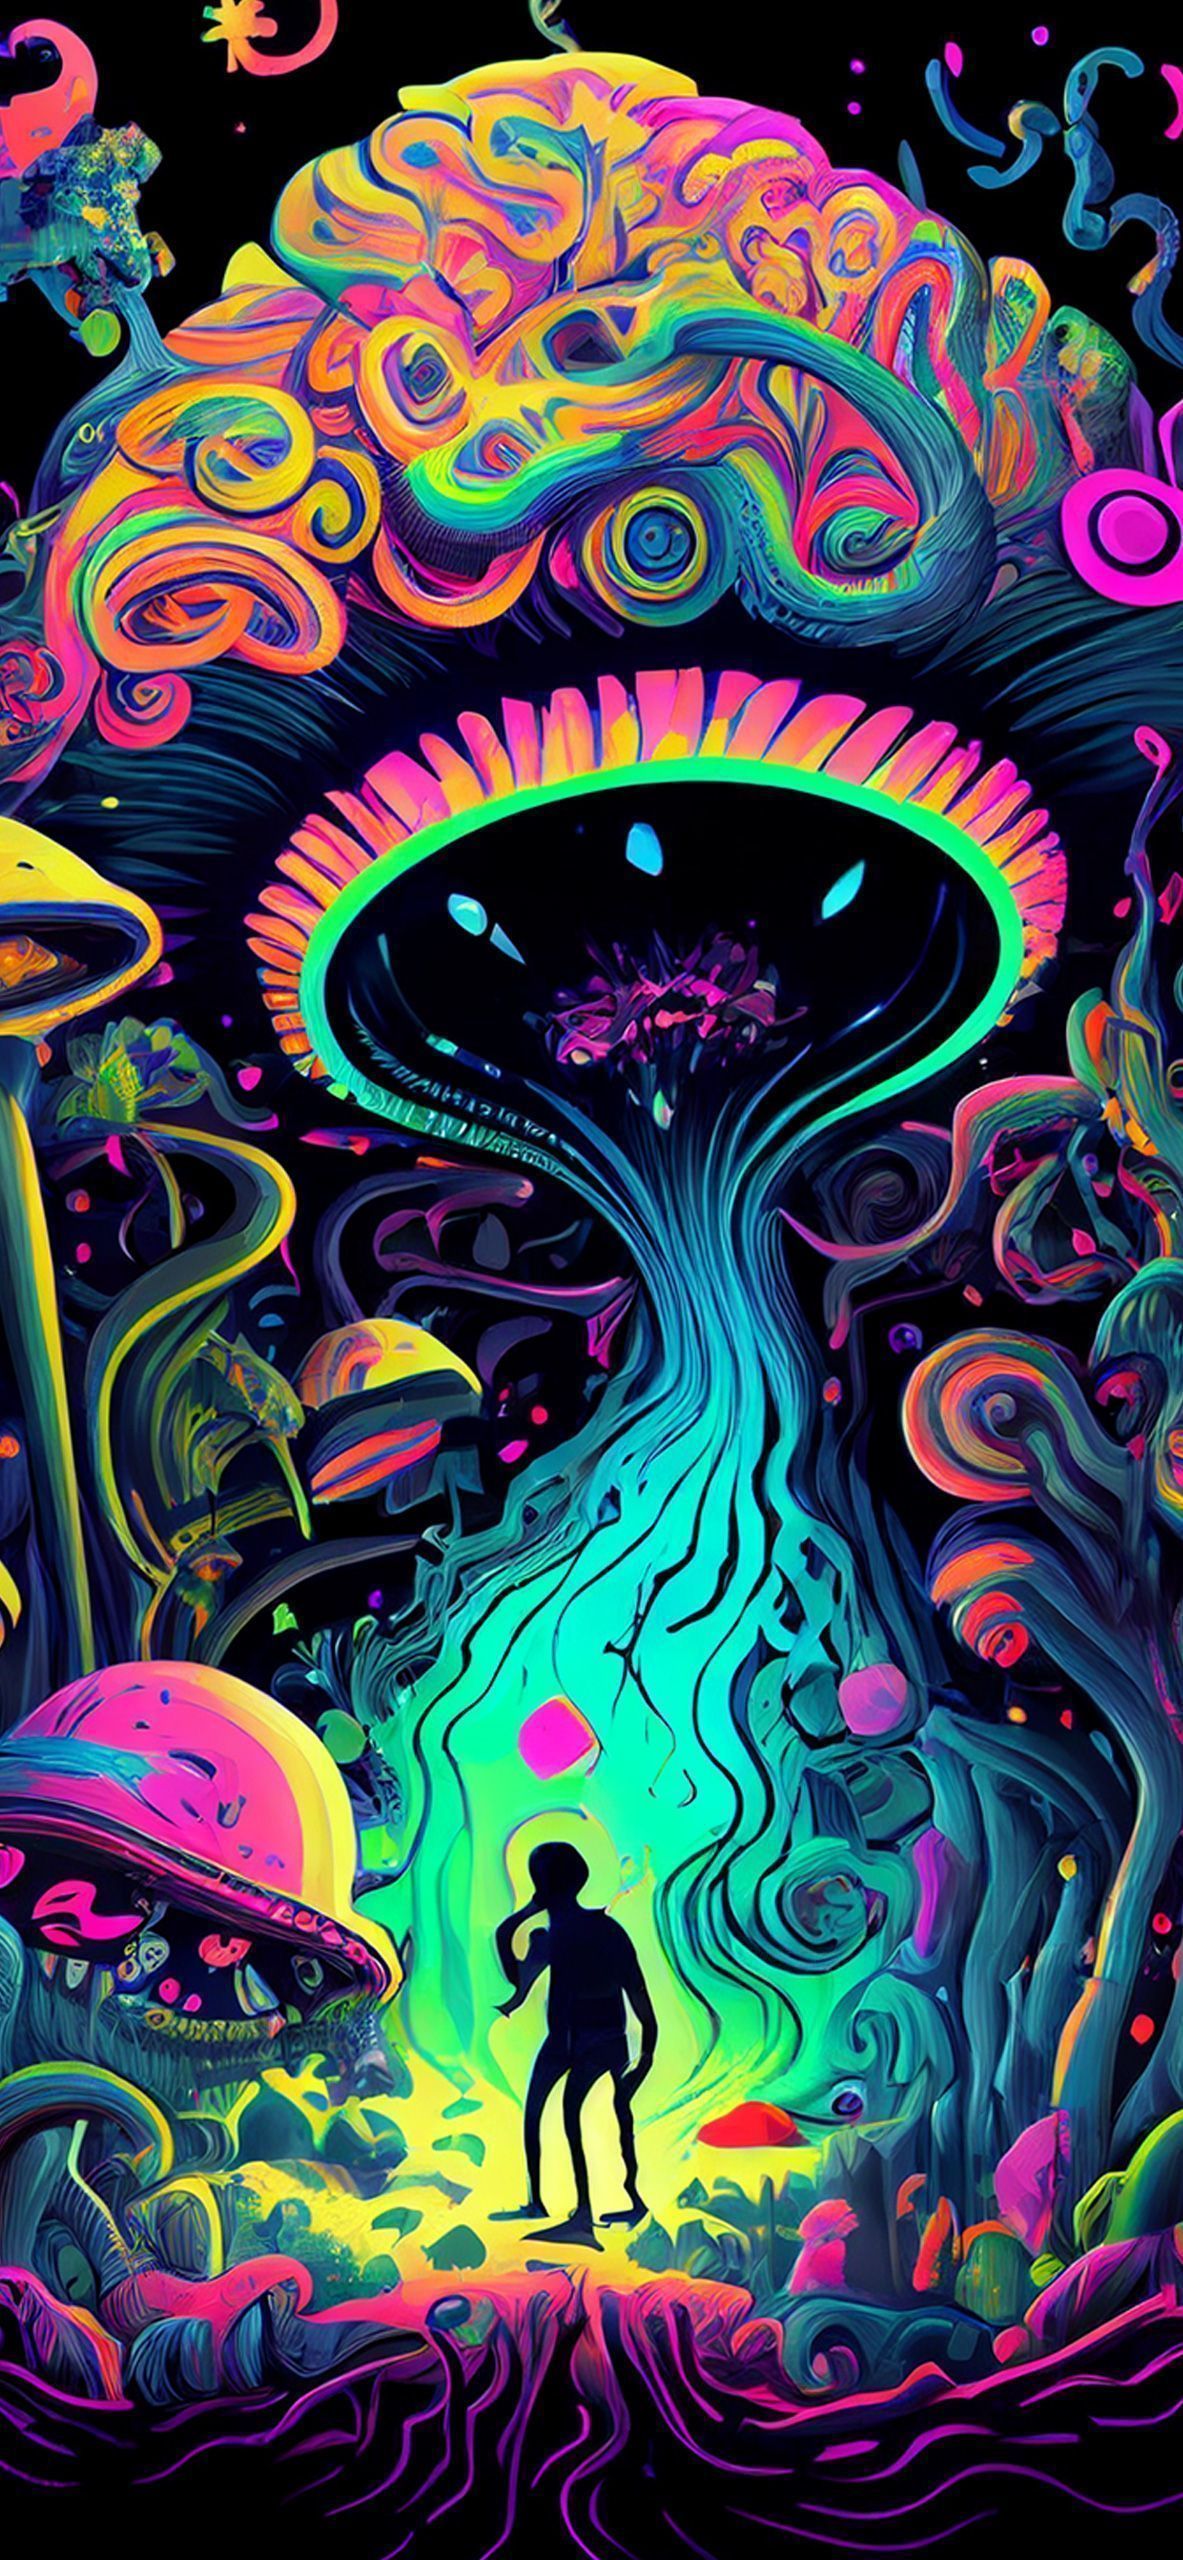 A man standing in front of an alien mushroom - Psychedelic, cool, trippy